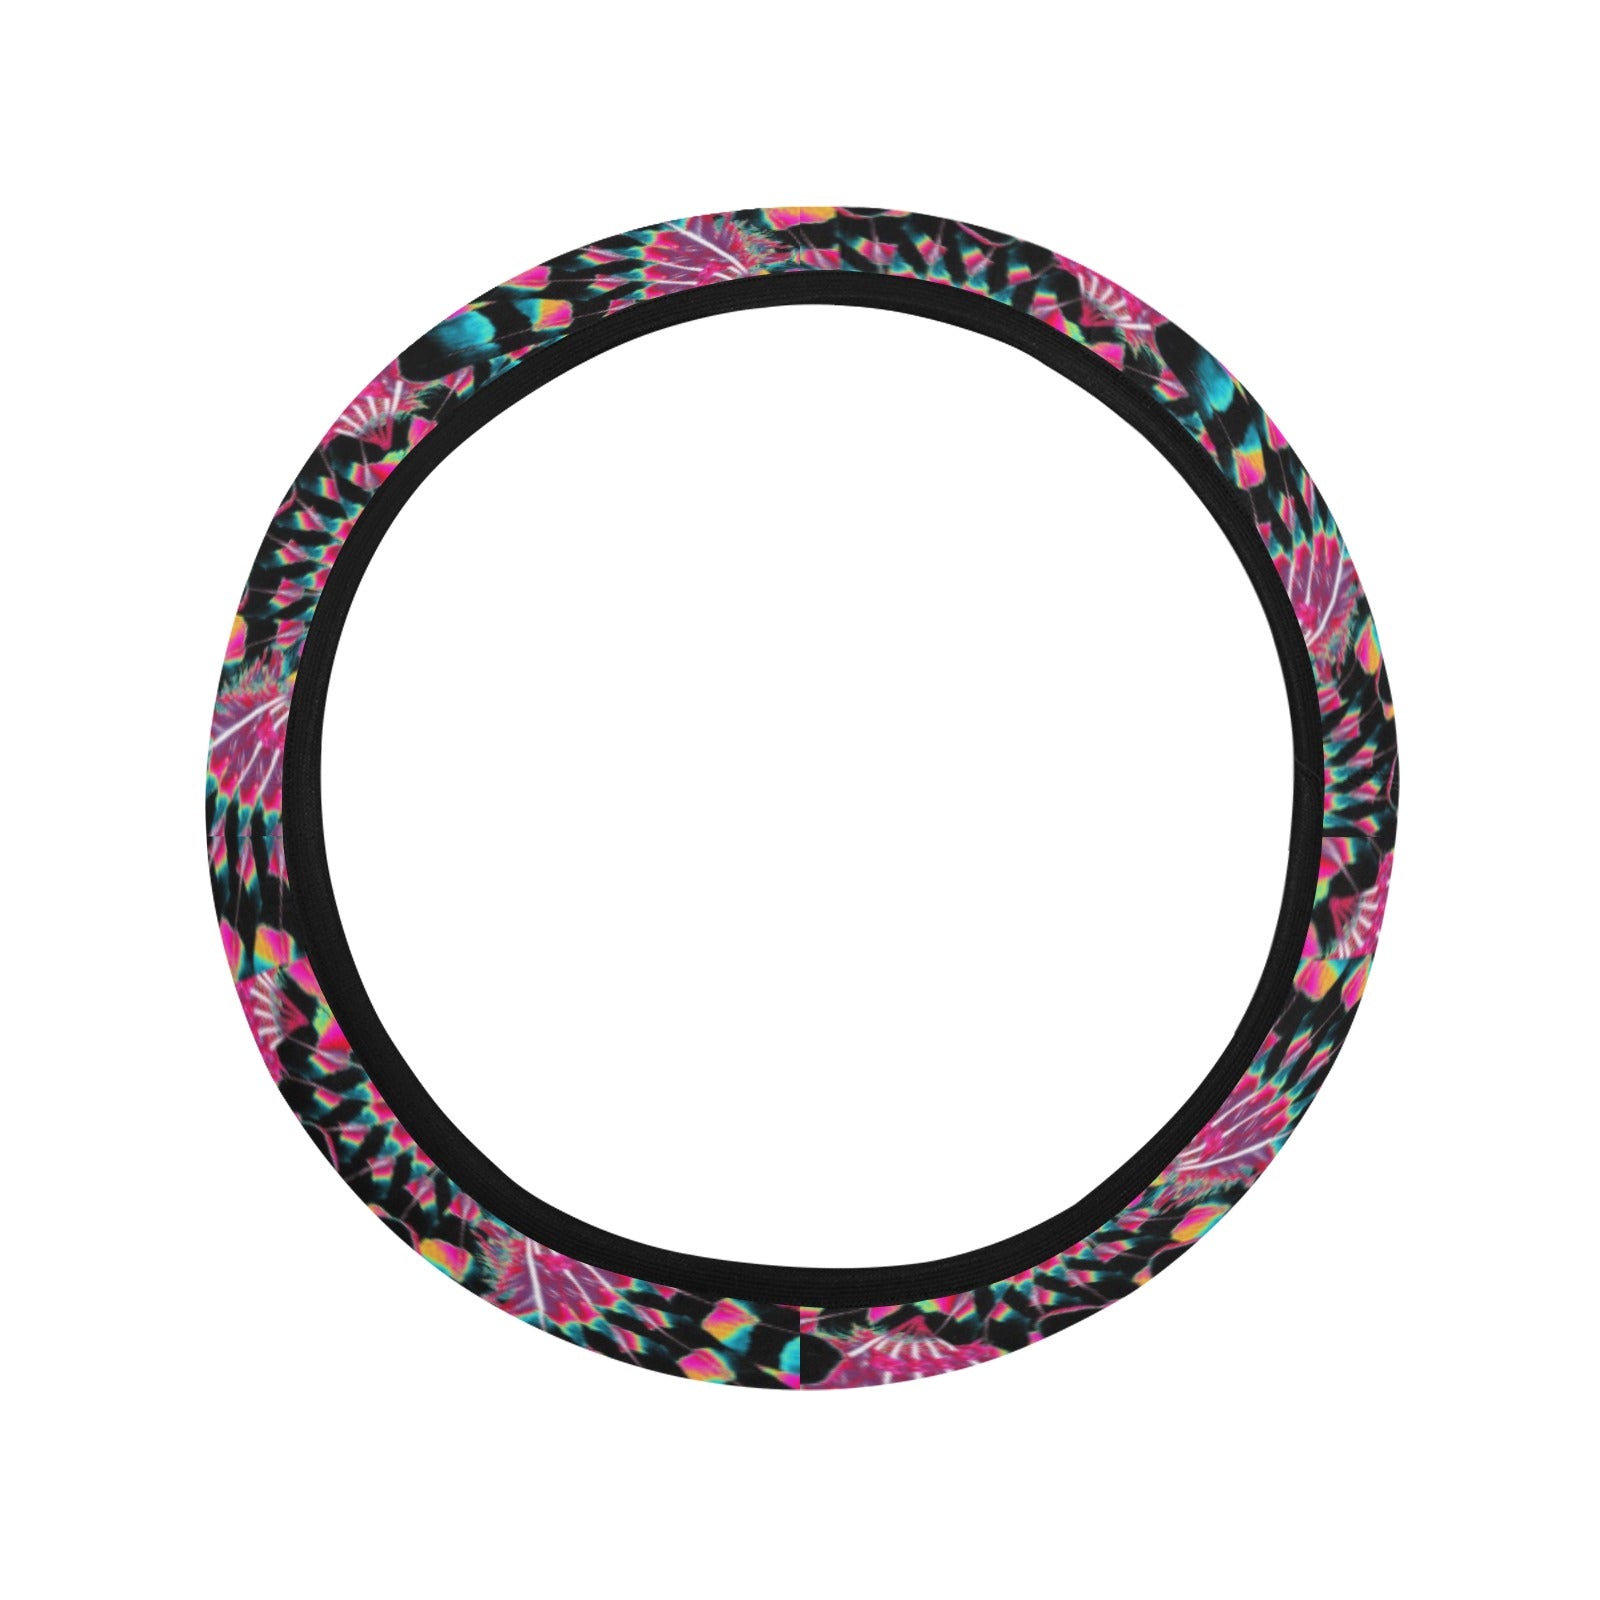 Hawk Feathers Heat Map Steering Wheel Cover with Elastic Edge